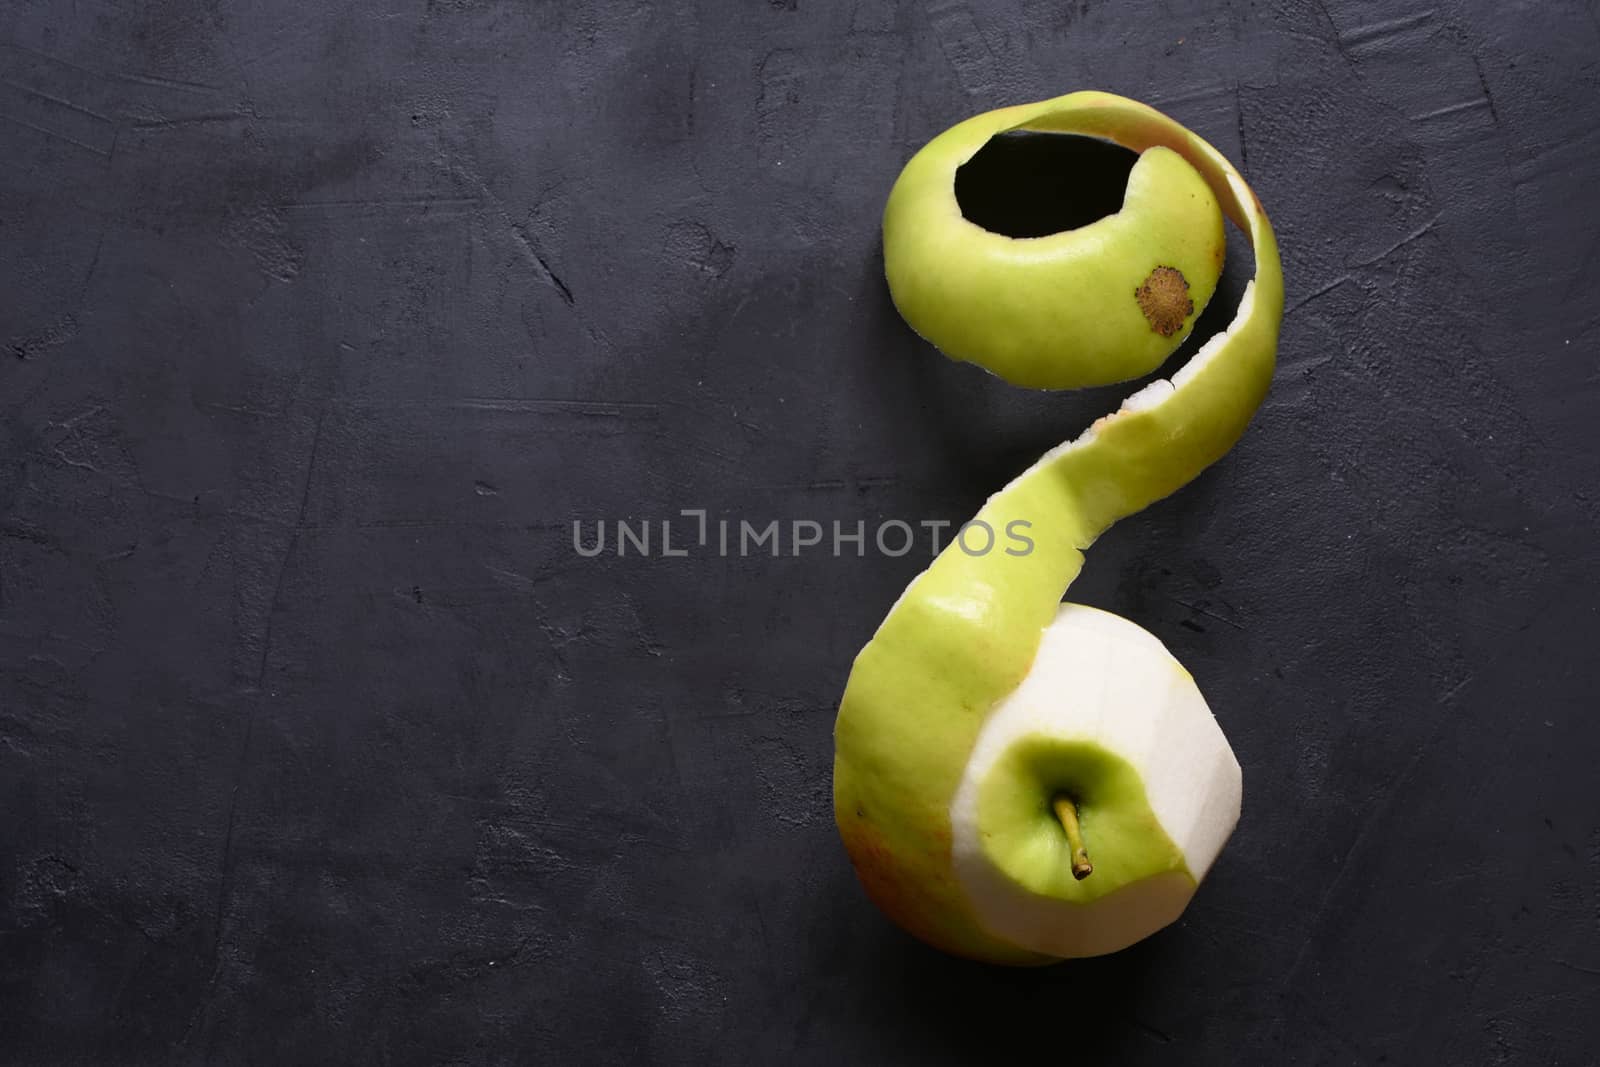 Piece of cut and peeled apple, peels and seeds, on black background by sashokddt